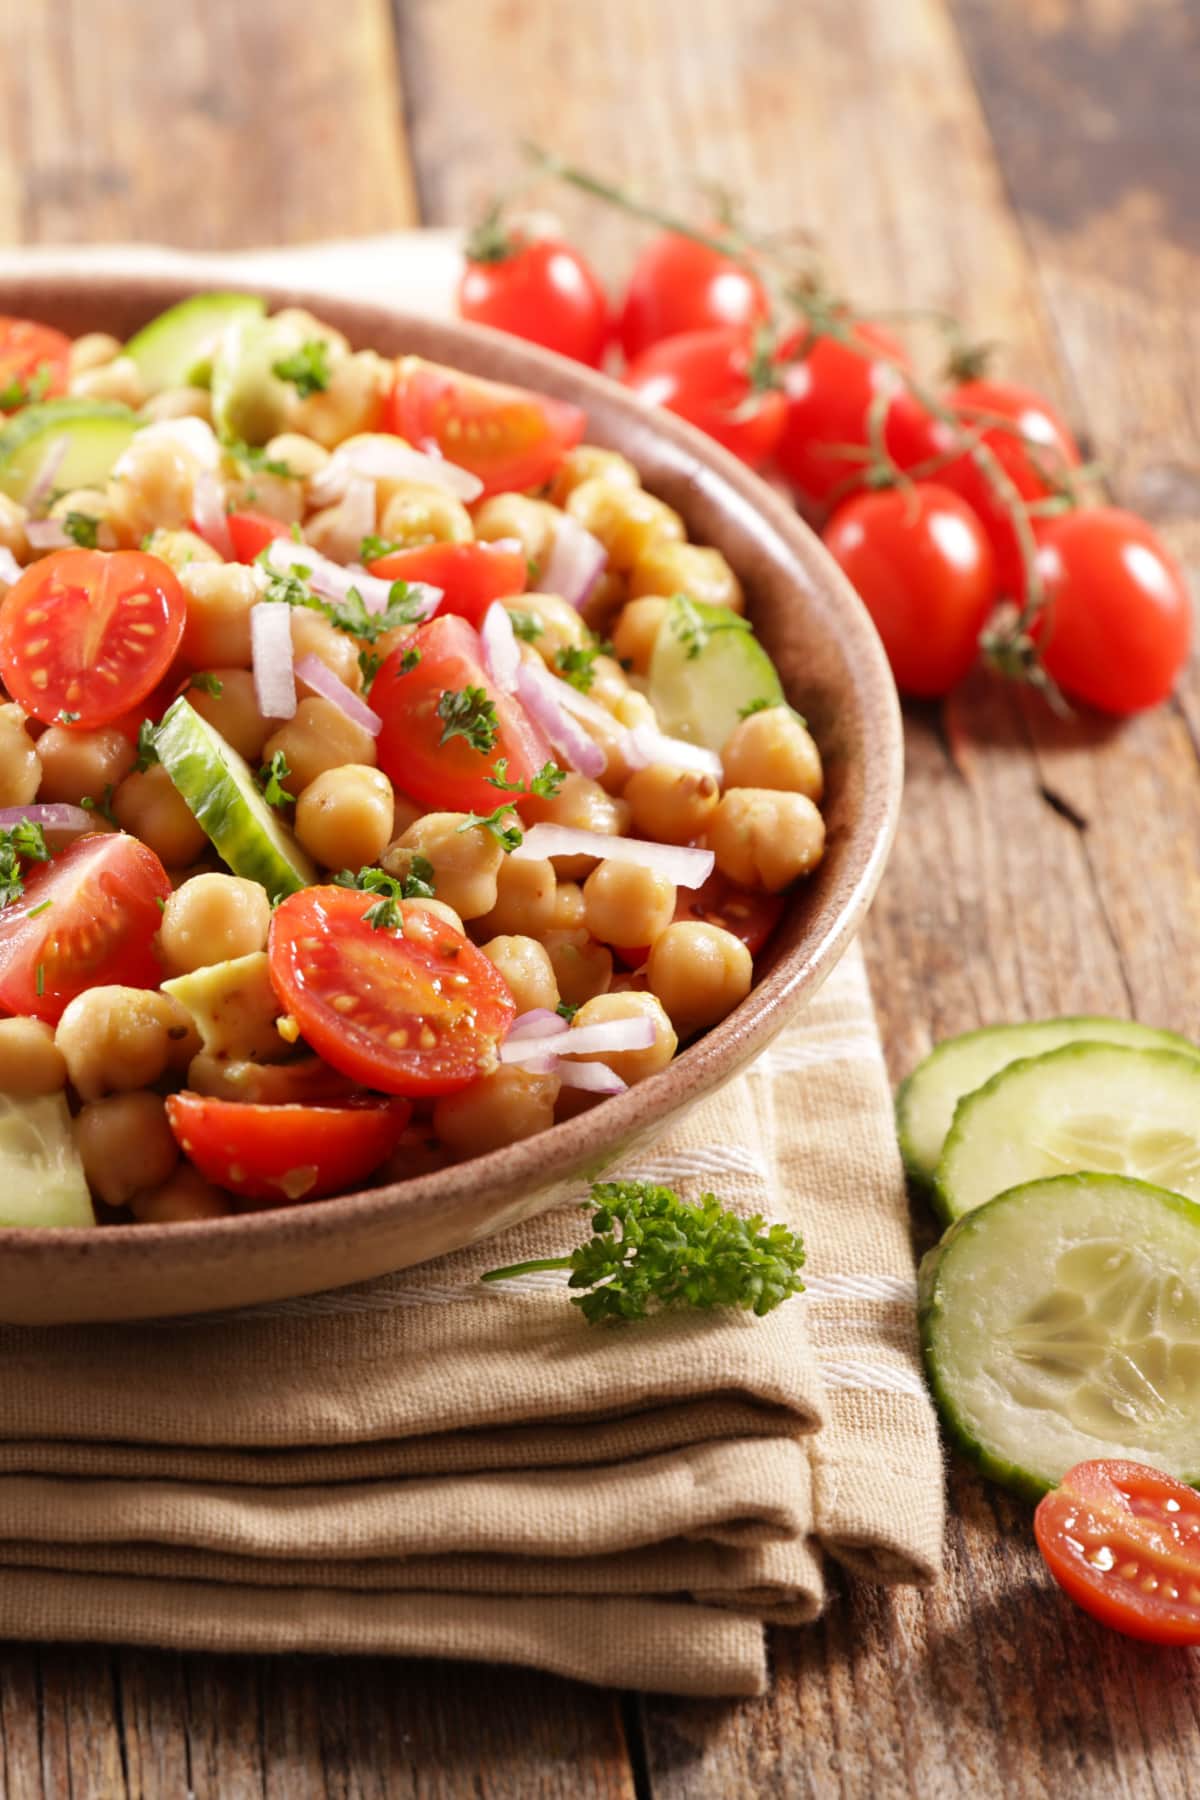 Chickpea salad made with mixed  chickpeas, juicy tomatoes, crunchy cucumbers, creamy avocado, 
 served in a wooden bowl.